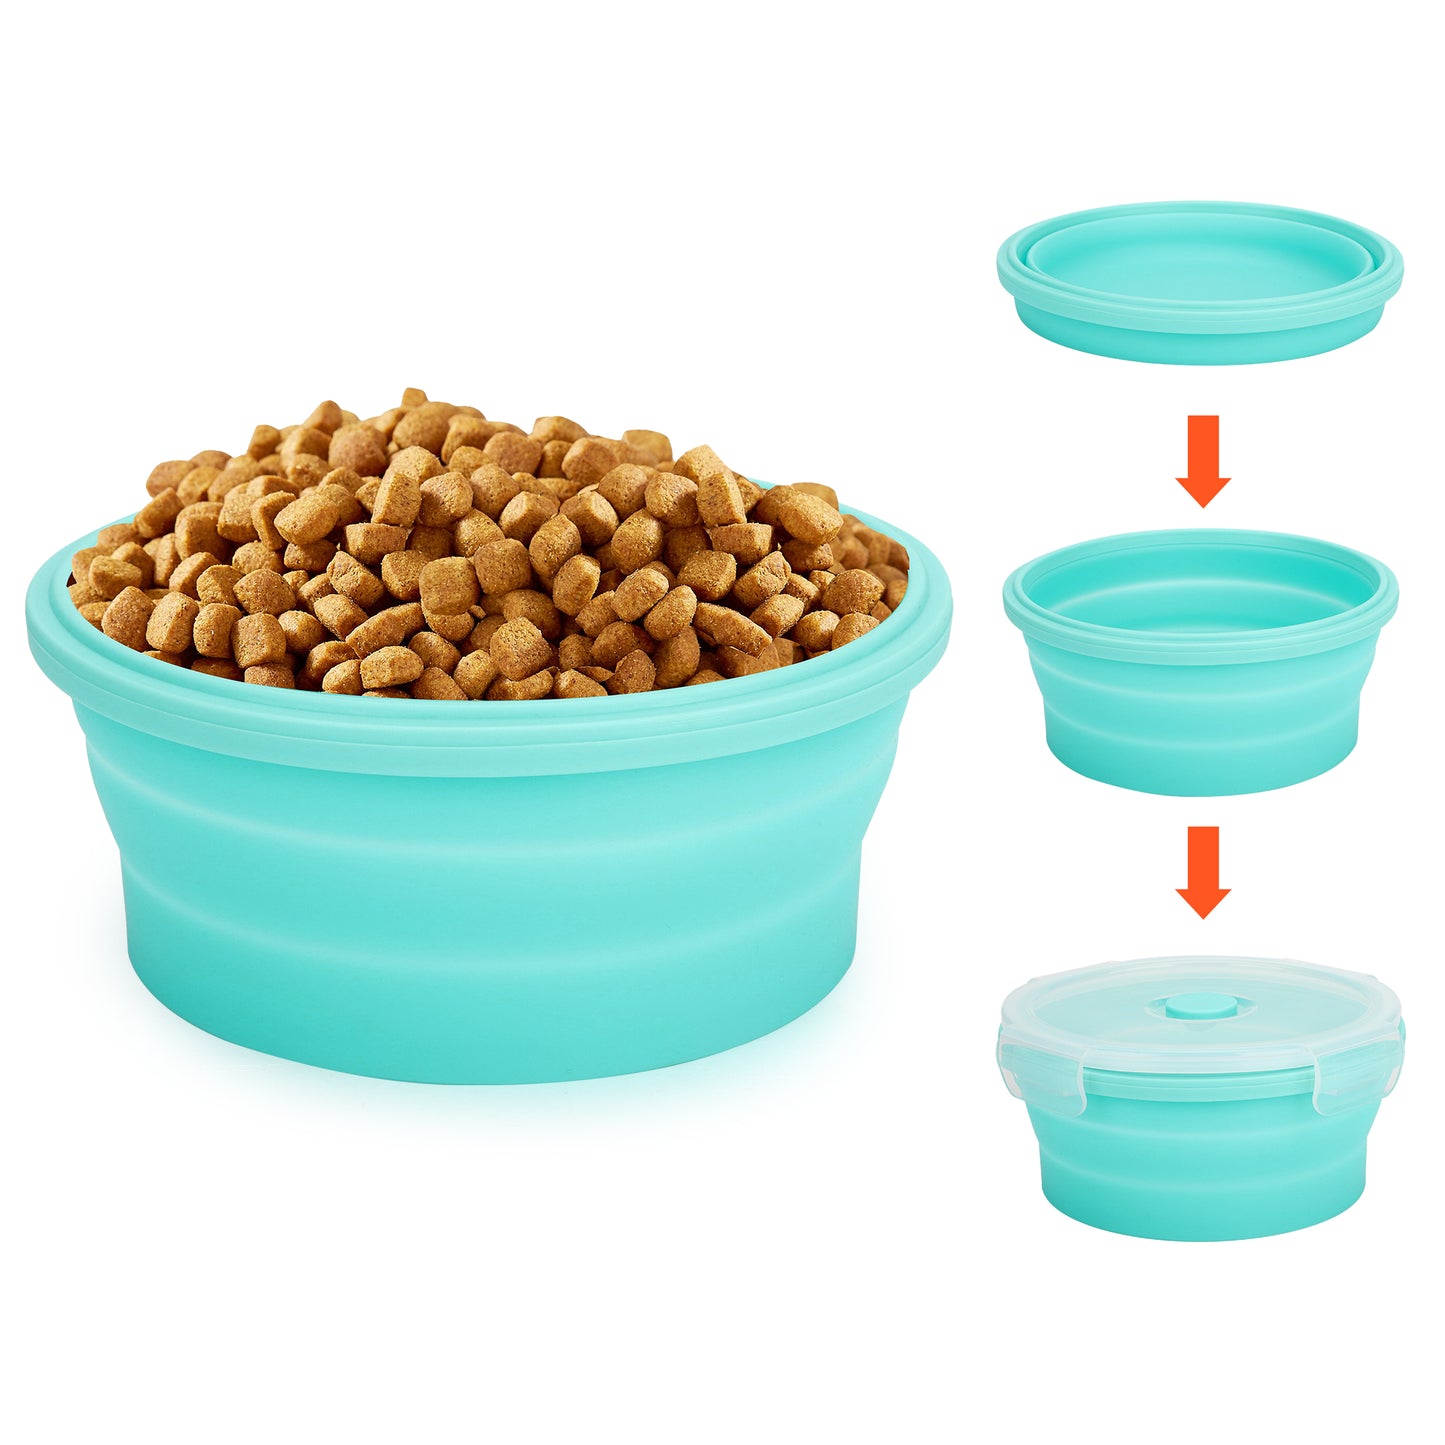 Collapsible Pet Bowl with Lid - Portable Silicone Feeding Dishes for Dogs and Cats indoor and outdoor use ,idea for camping, hiking( Light Blue)